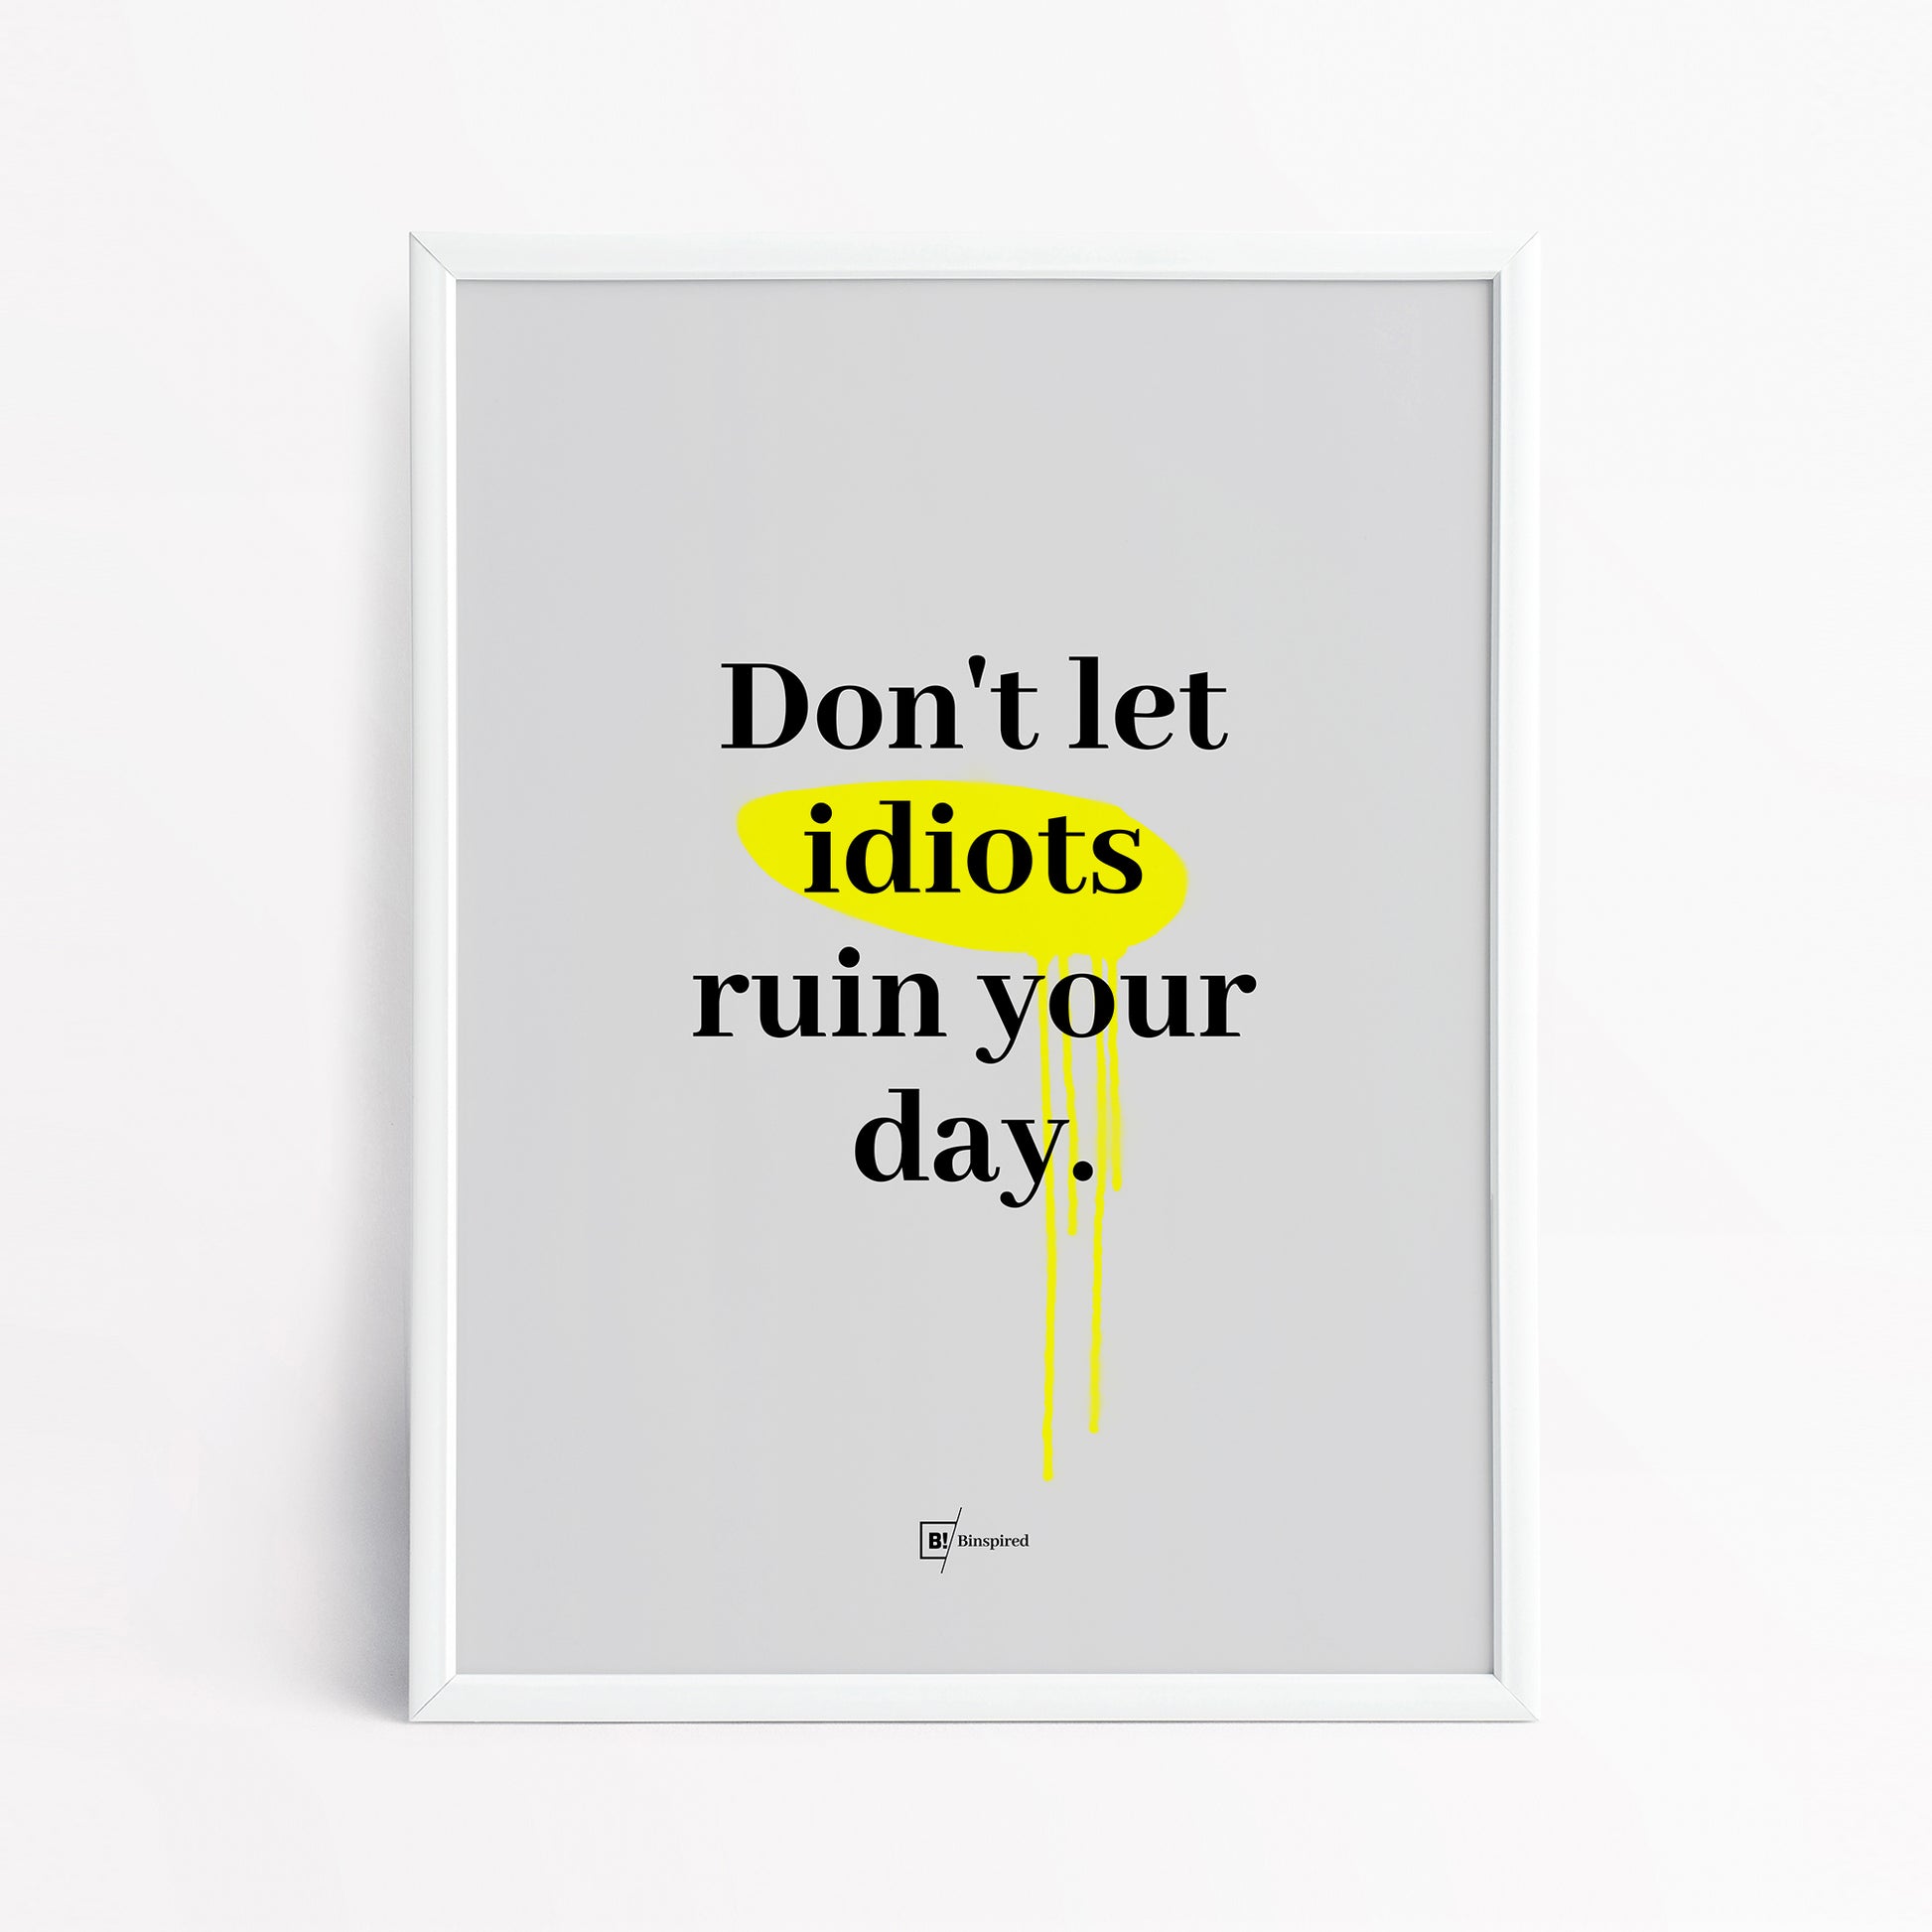 Be inspired by our "Don't let idiots ruin your day" quote art print! This artwork was printed using the giclée process on archival acid-free paper and is presented in a simple white frame that captures its timeless beauty in every detail.